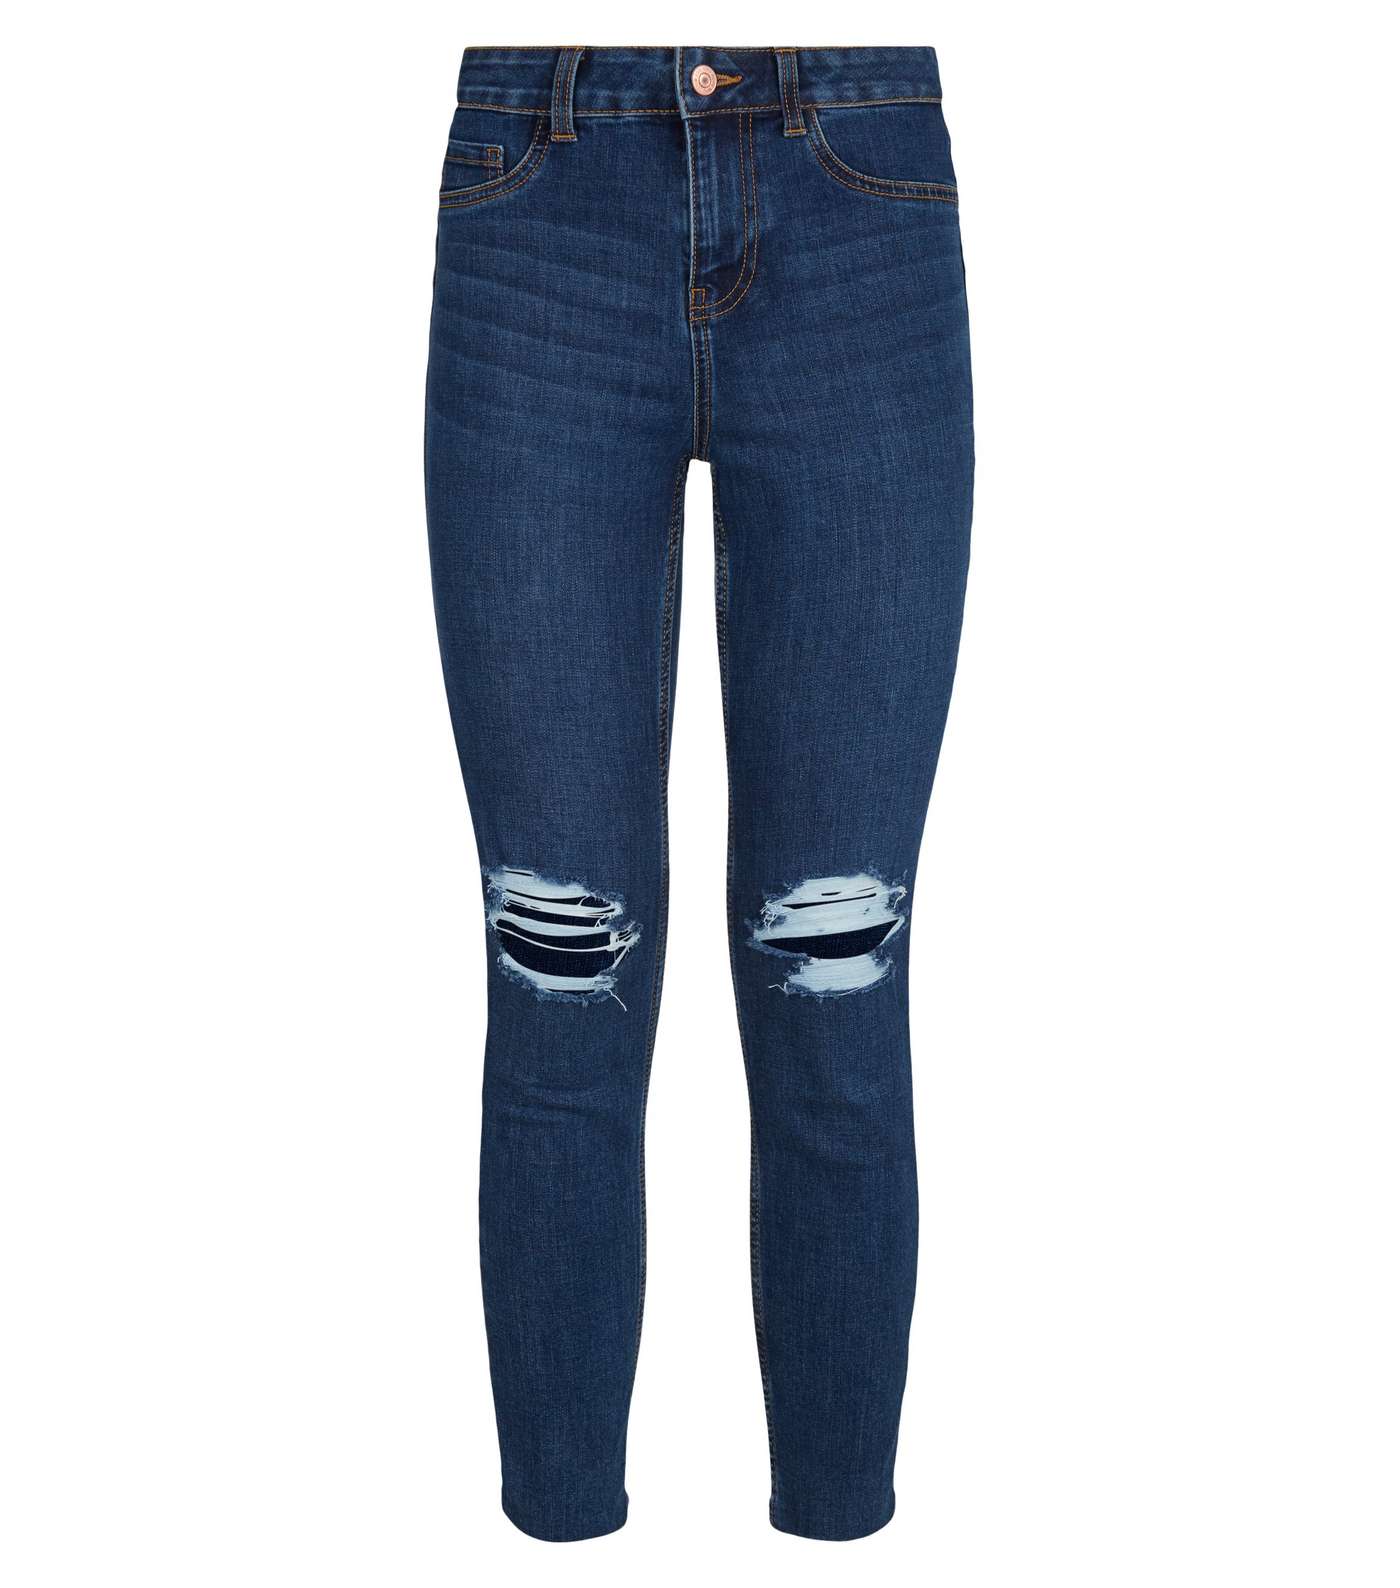 Petite Blue Rinse Wash Ripped Skinny Jeans Image 4